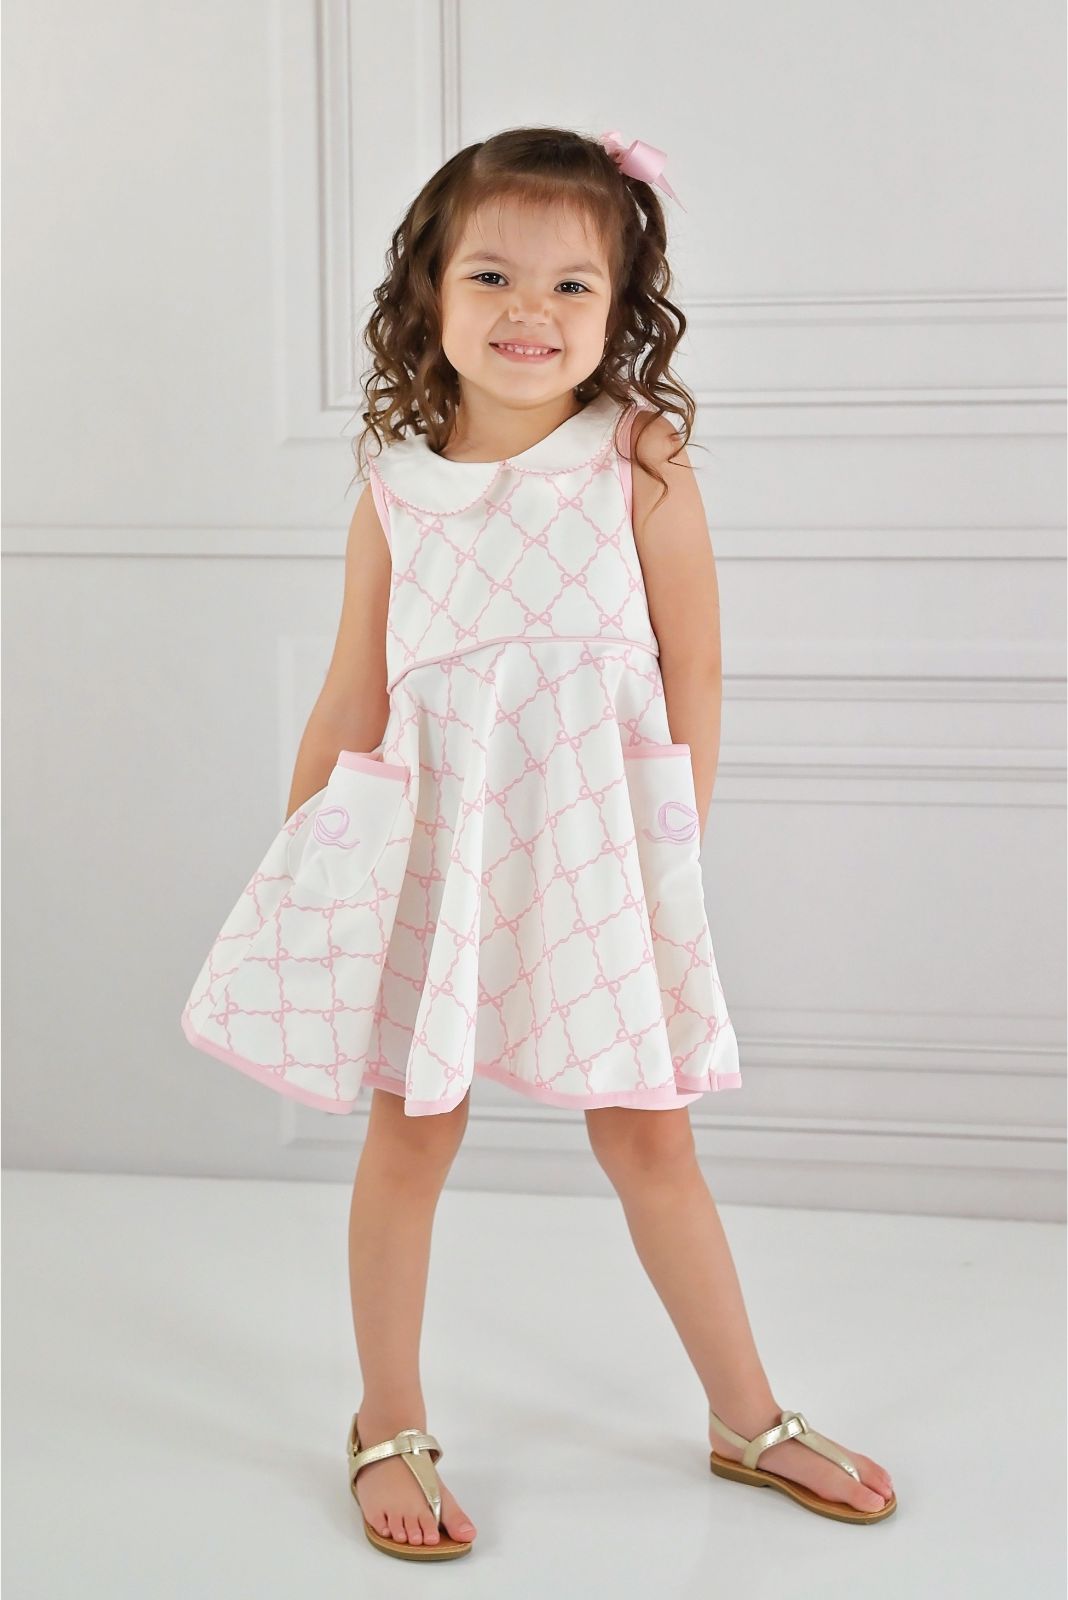 Swoon Baby Bows N' Berries Proper Picot Pocket Dress Style 23-60